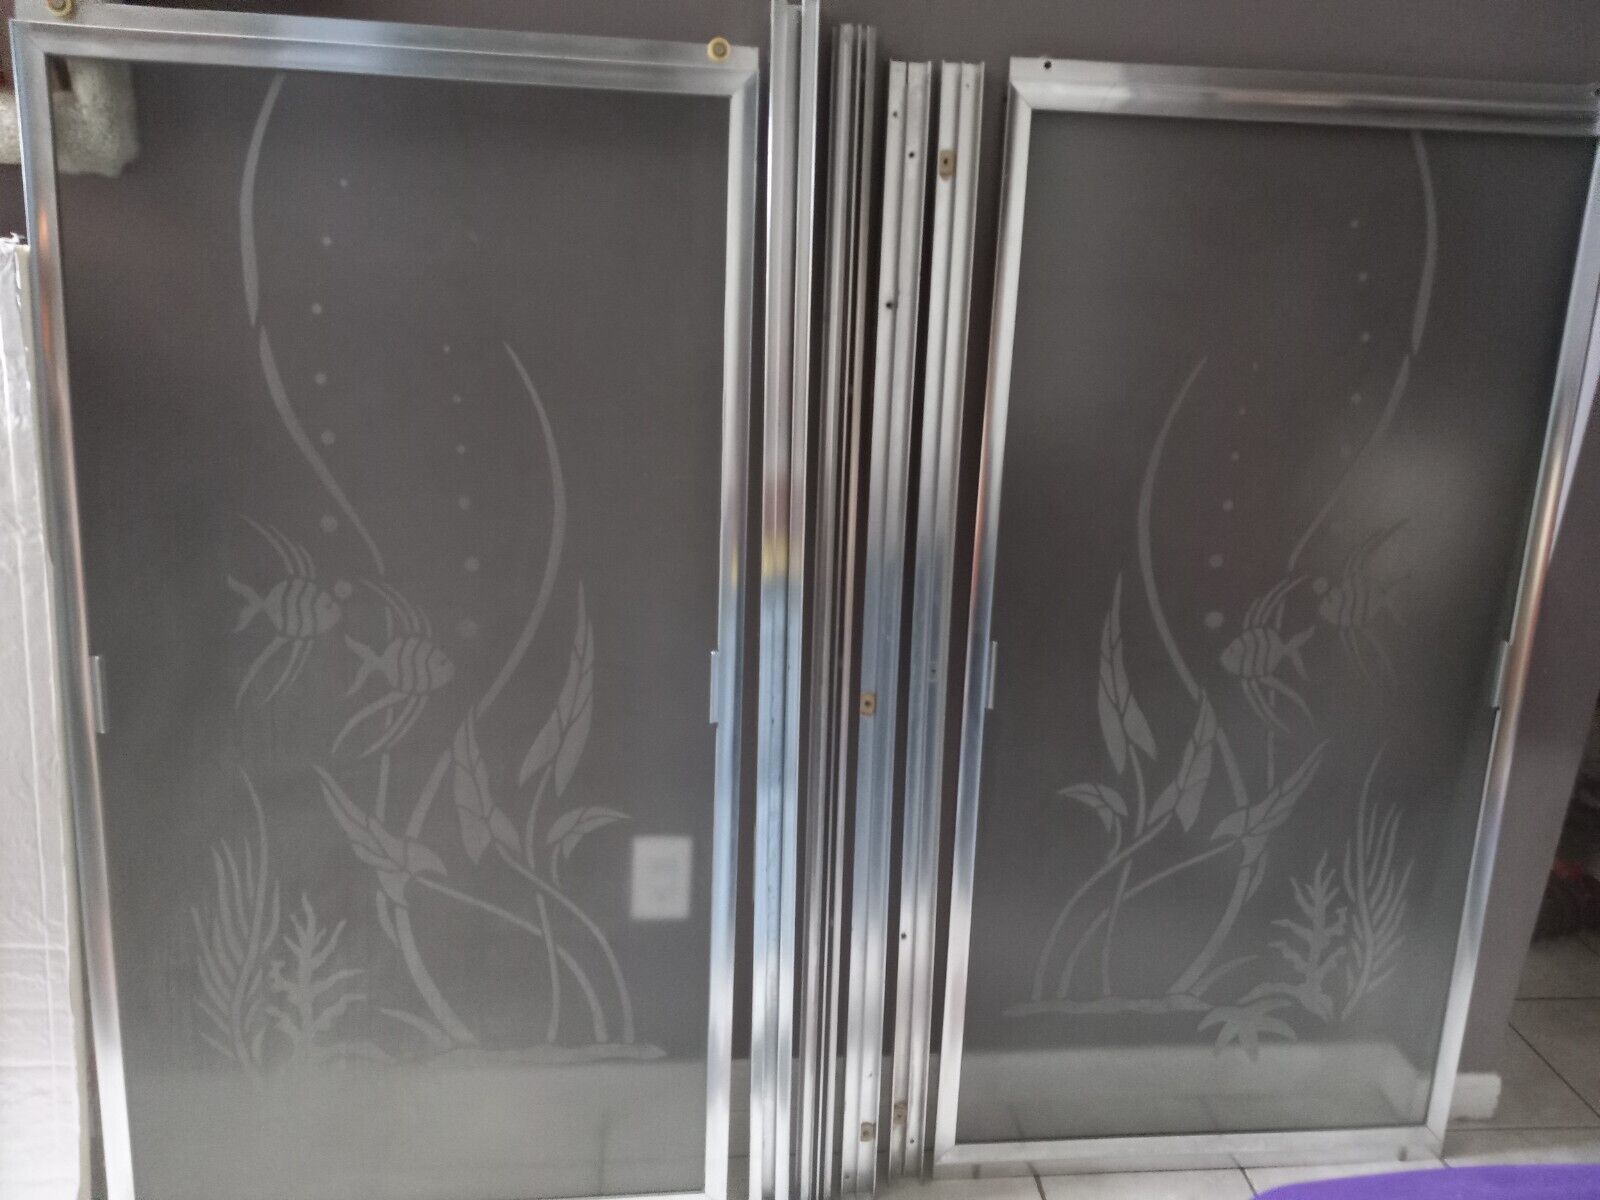 Primary image for Beautiful "Under the Sea" Themed Etched Shower Doors w/ Frame